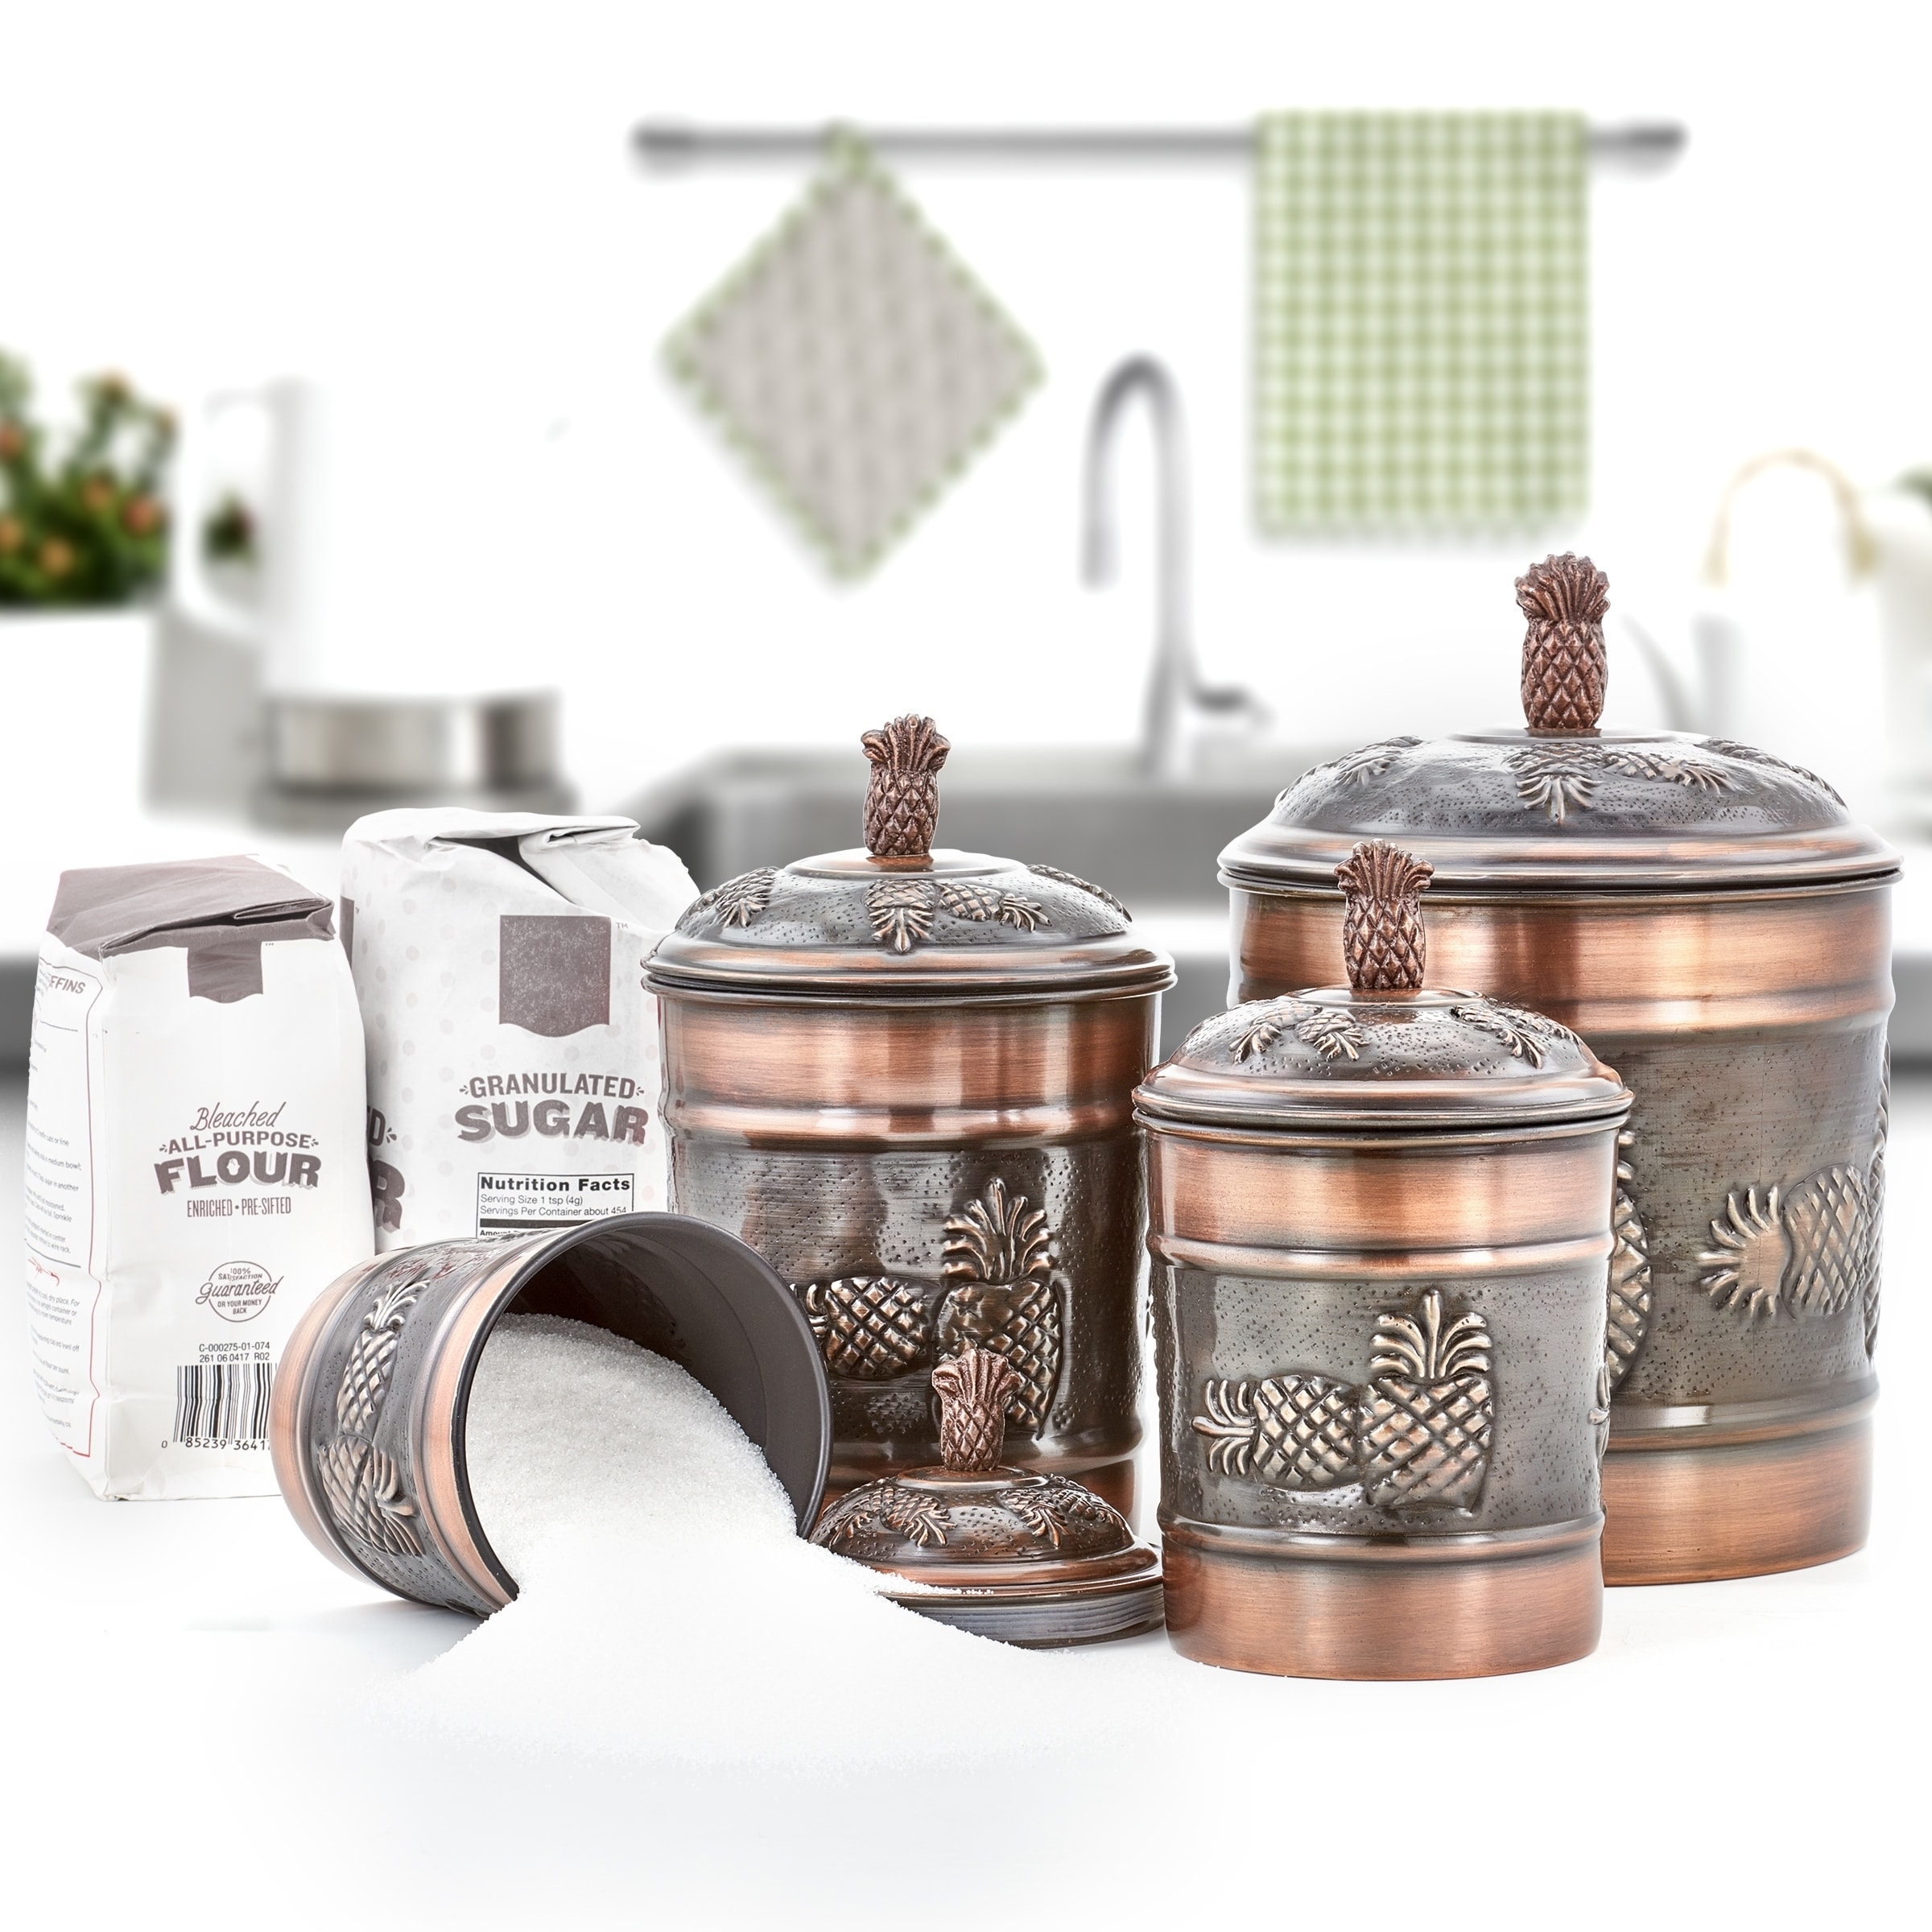 Copper Kitchen Food Canister Set of 4 by Kauri Design - Bed Bath & Beyond -  20229173